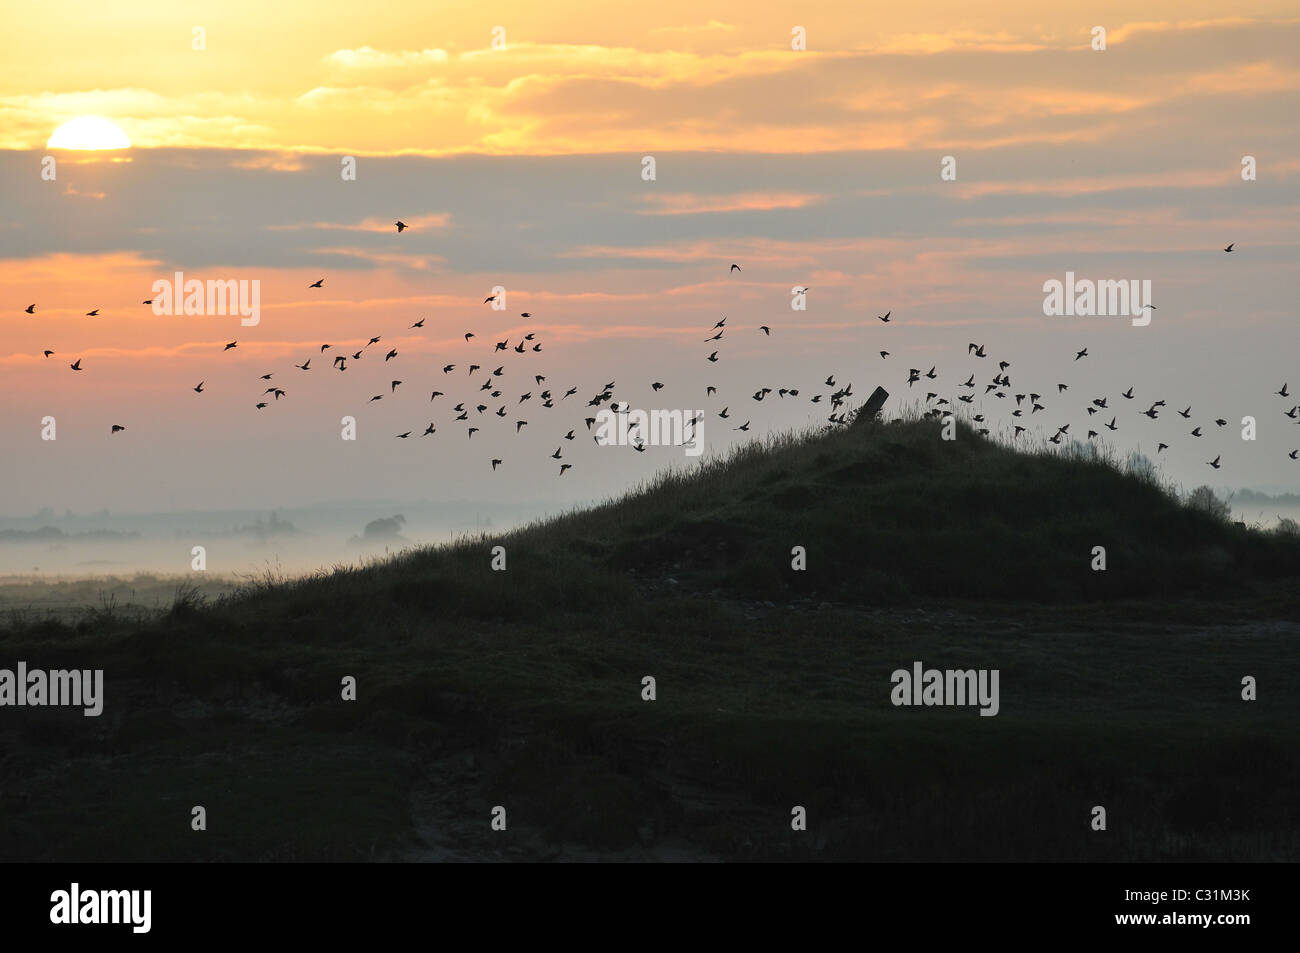 A FLIGHT OF THRUSHES IN THE BAY OF SOMME, SOMME (80), FRANCE Stock Photo